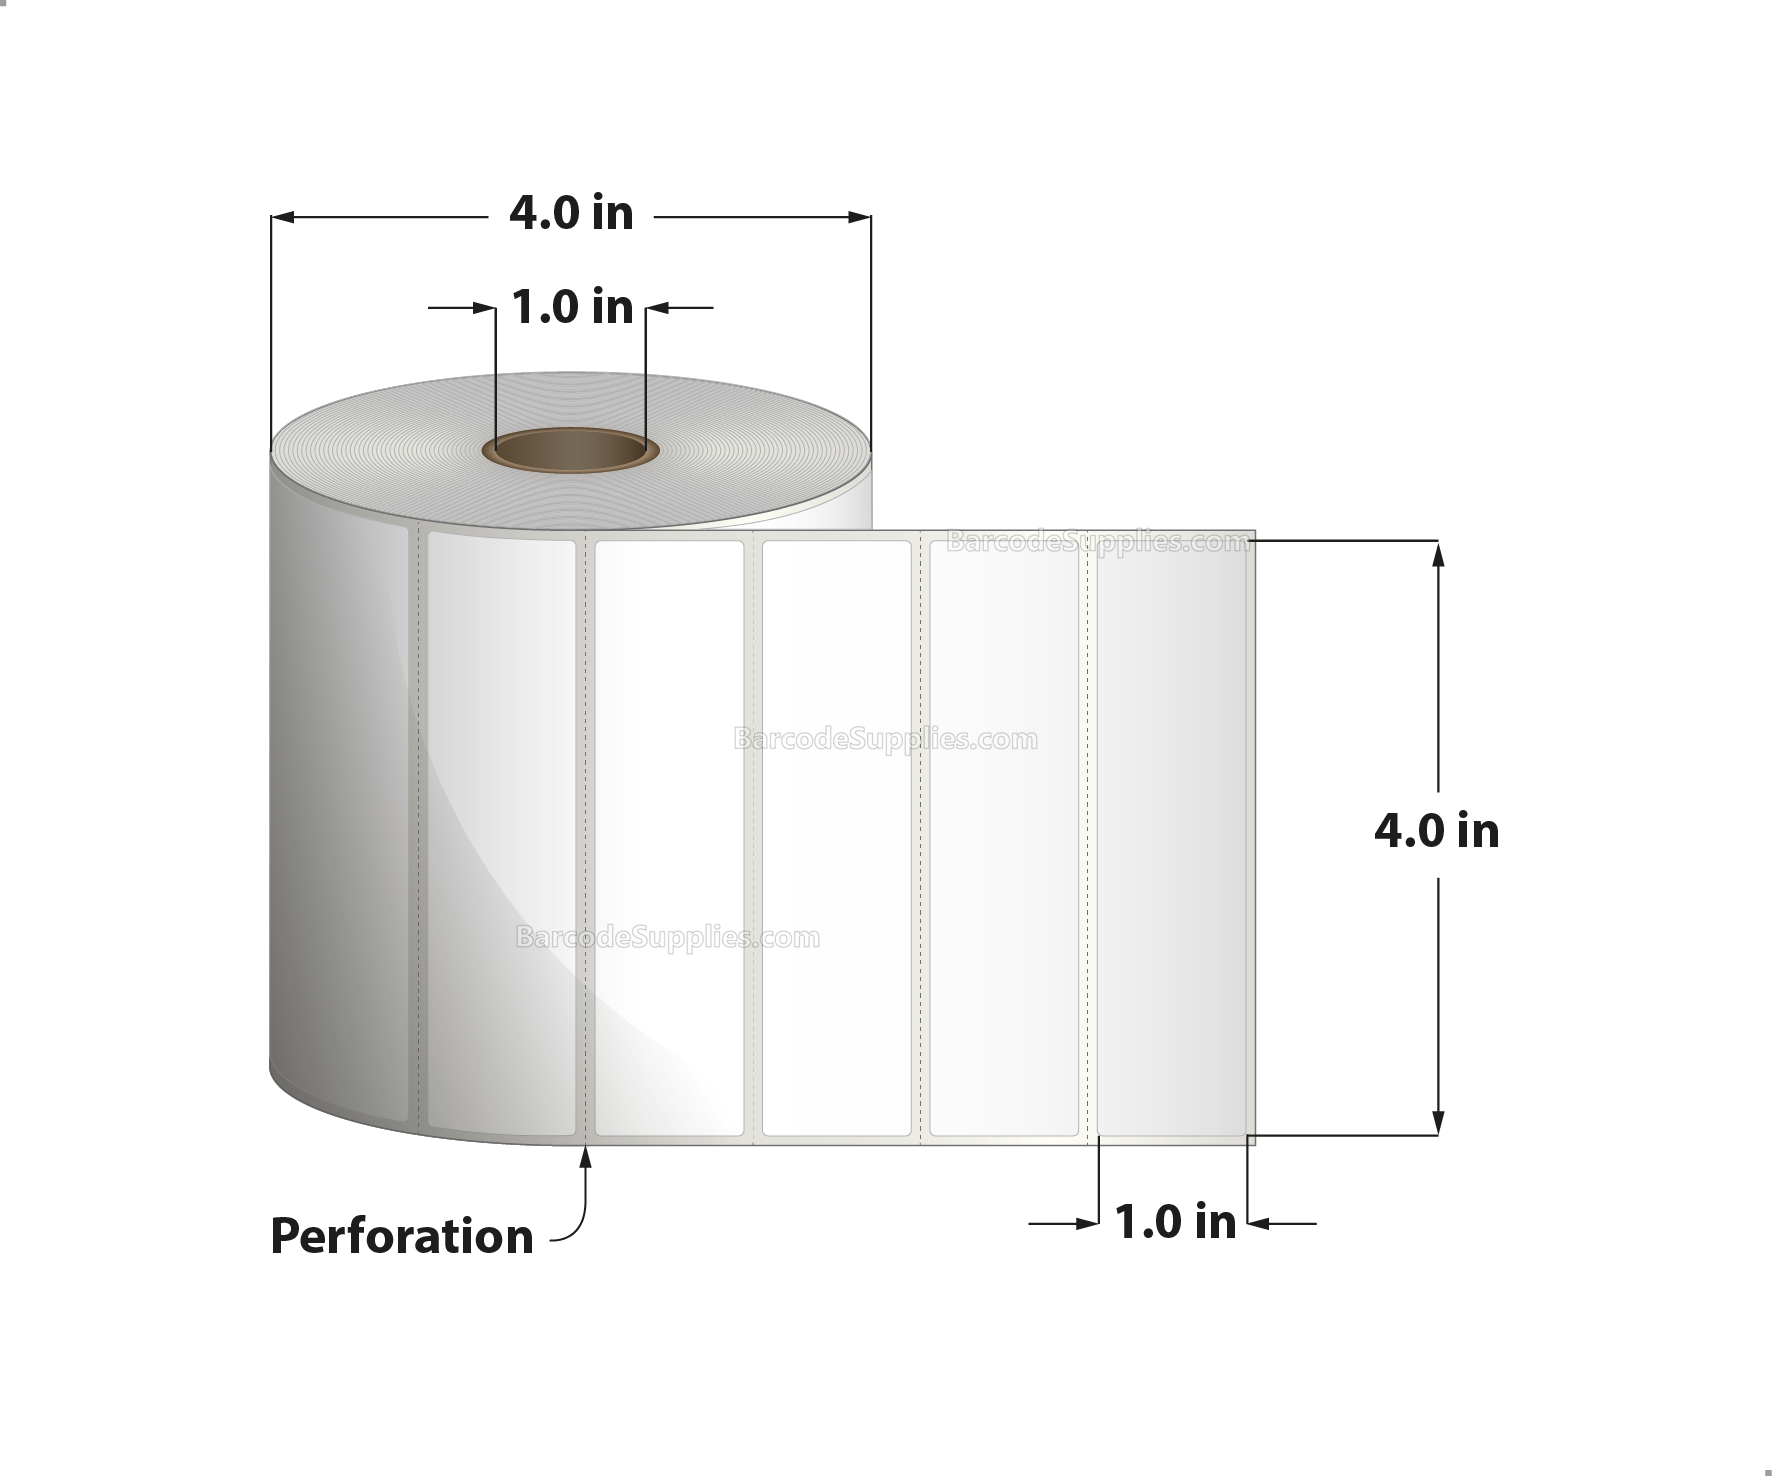 4 x 1 Direct Thermal White Labels With Rubber Adhesive - Perforated - 1310 Labels Per Roll - Carton Of 12 Rolls - 15720 Labels Total - MPN: RDT4-400100-1P